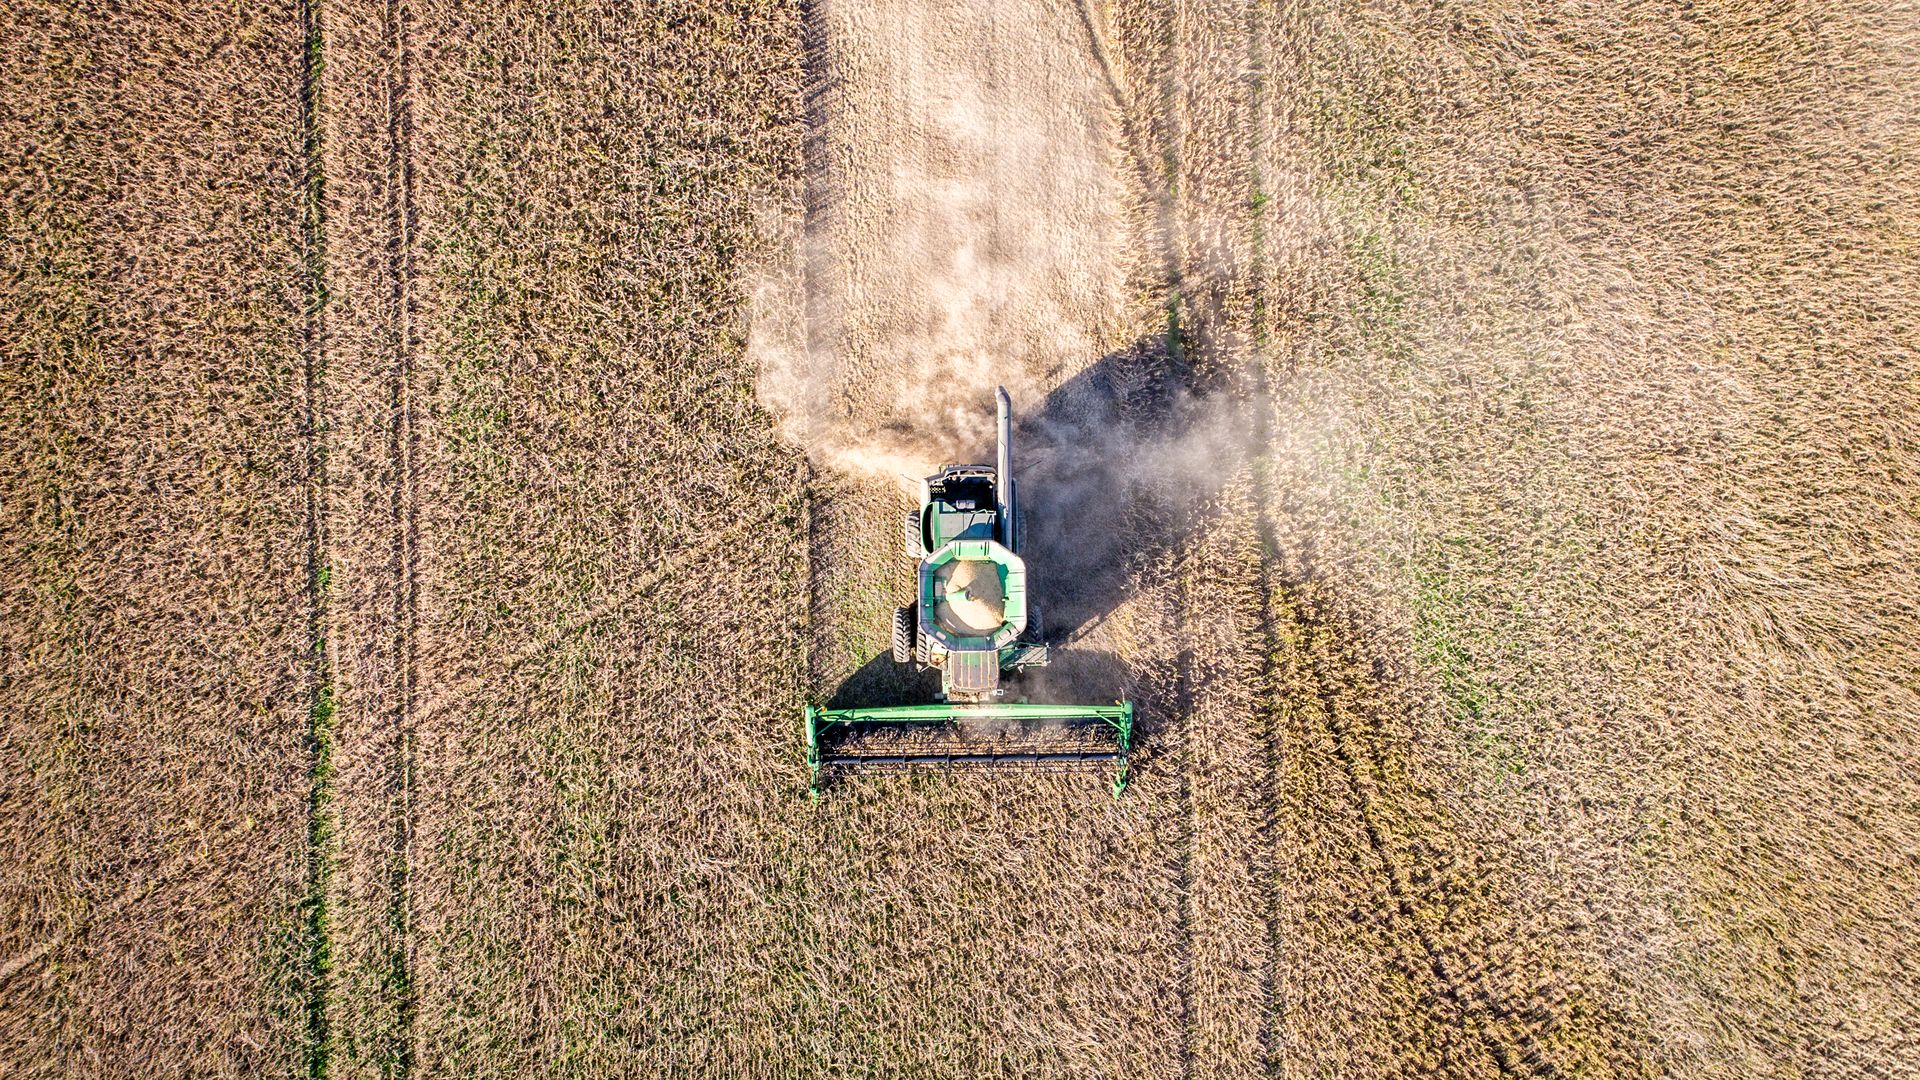 Aerial view looking directly down at a combine harvester driving through rows of soybeans and kicking up dust, Maryland. (Photo by: Edwin Remsberg / VWPics/Universal Images Group via Getty Images)